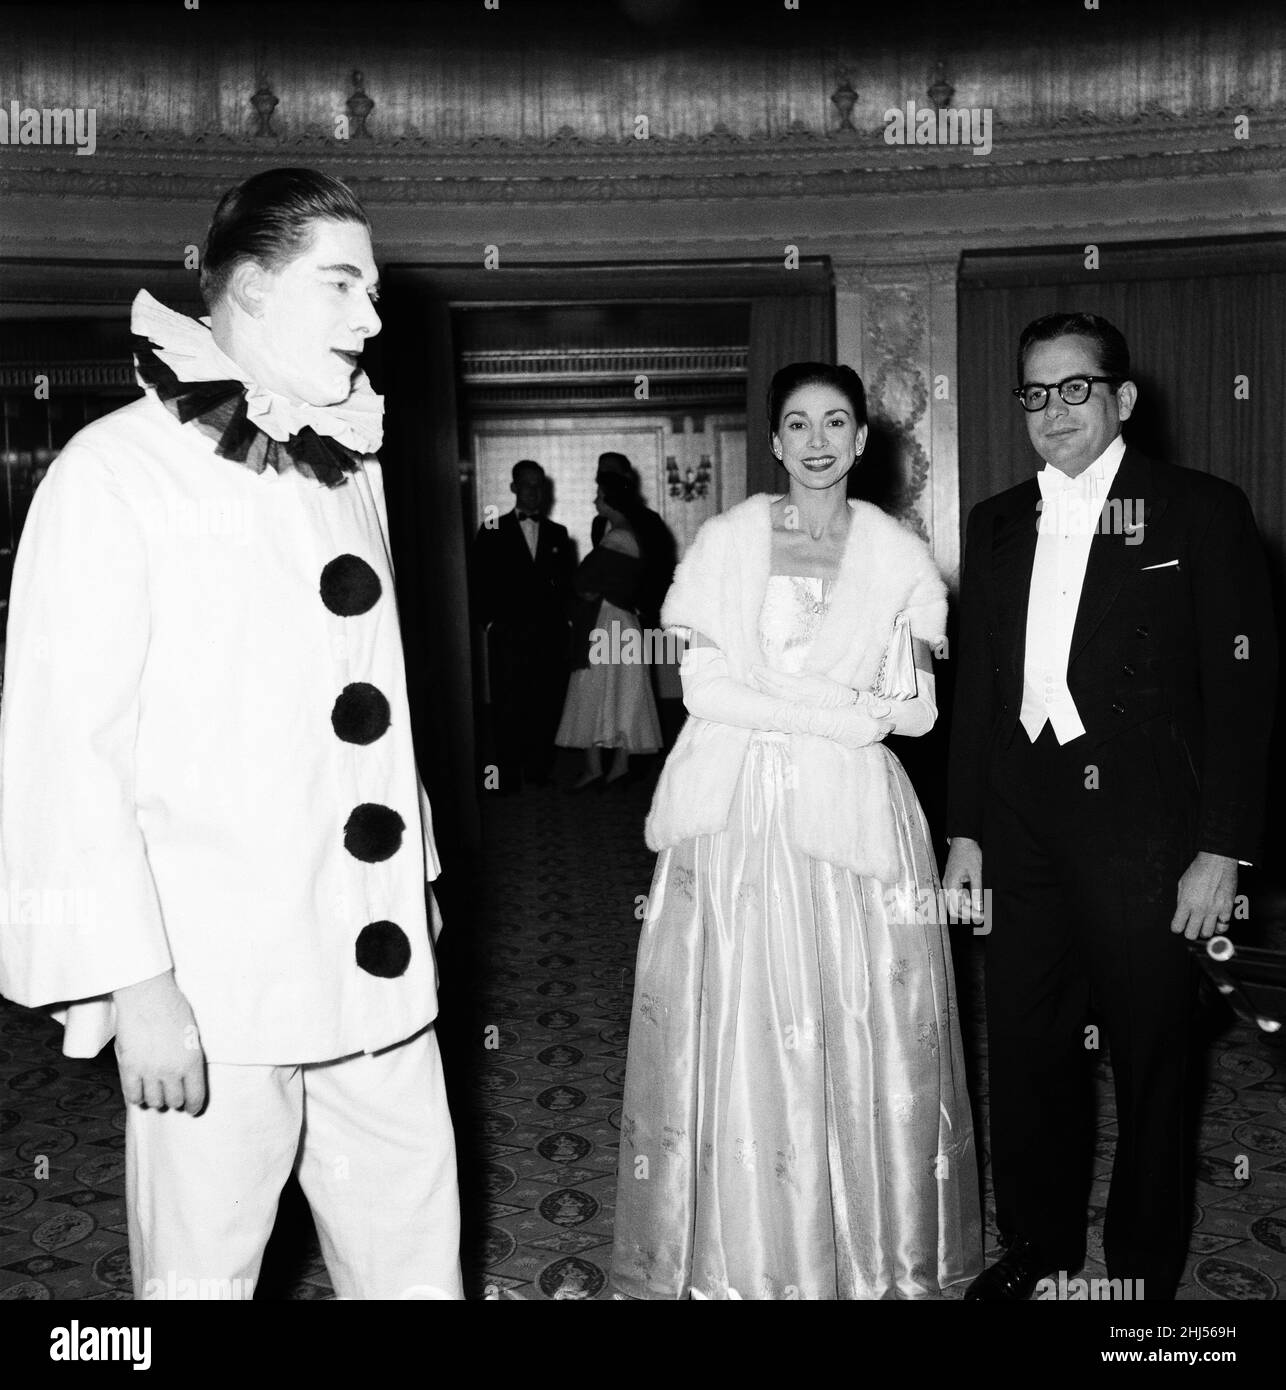 Annual 'Opera Ball' in aid of the English Opera Group is held at The Dorcester Hotel in London 22nd February 1956.   Hundreds of guests connected with opera attended the Opera Ball, many in fancy dress and danced till 3am.     Pictured: George Henry Hubert Lascelles, 7th Earl of Harewood, dressed as a clown, greets Margot Fonteyn as she arrives for the ball Stock Photo